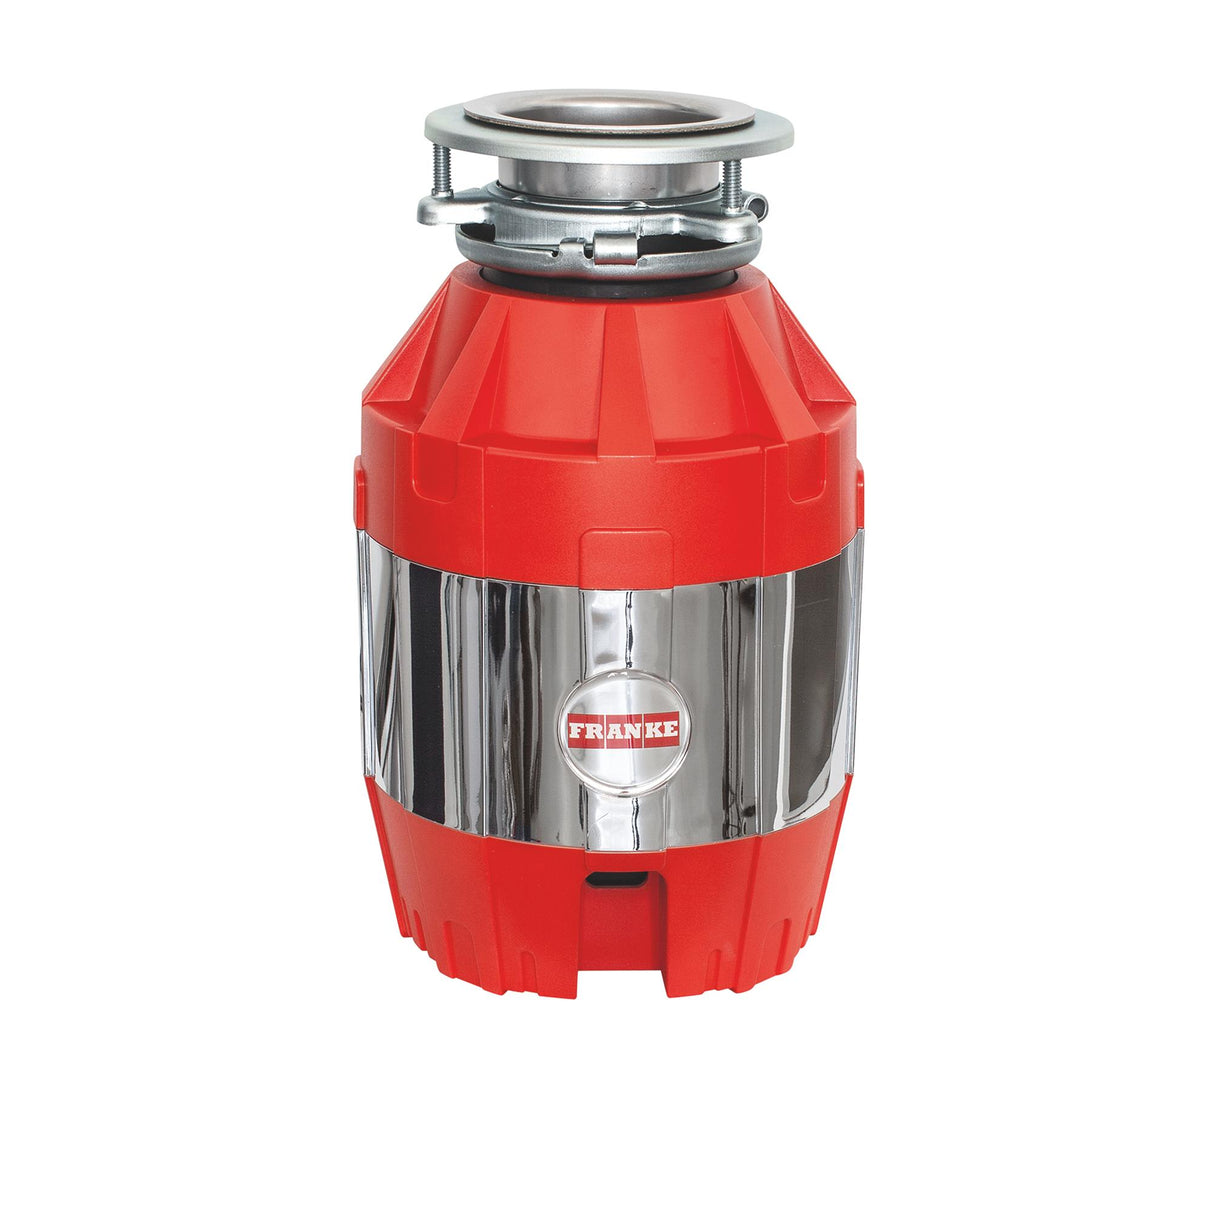 FRANKE FWDJ50 1/2 Horse Power Quiet Continuous Feed Waste Disposer Torque Master 2600 RPM Jam-Resistant DC Motor in Red/Chrome